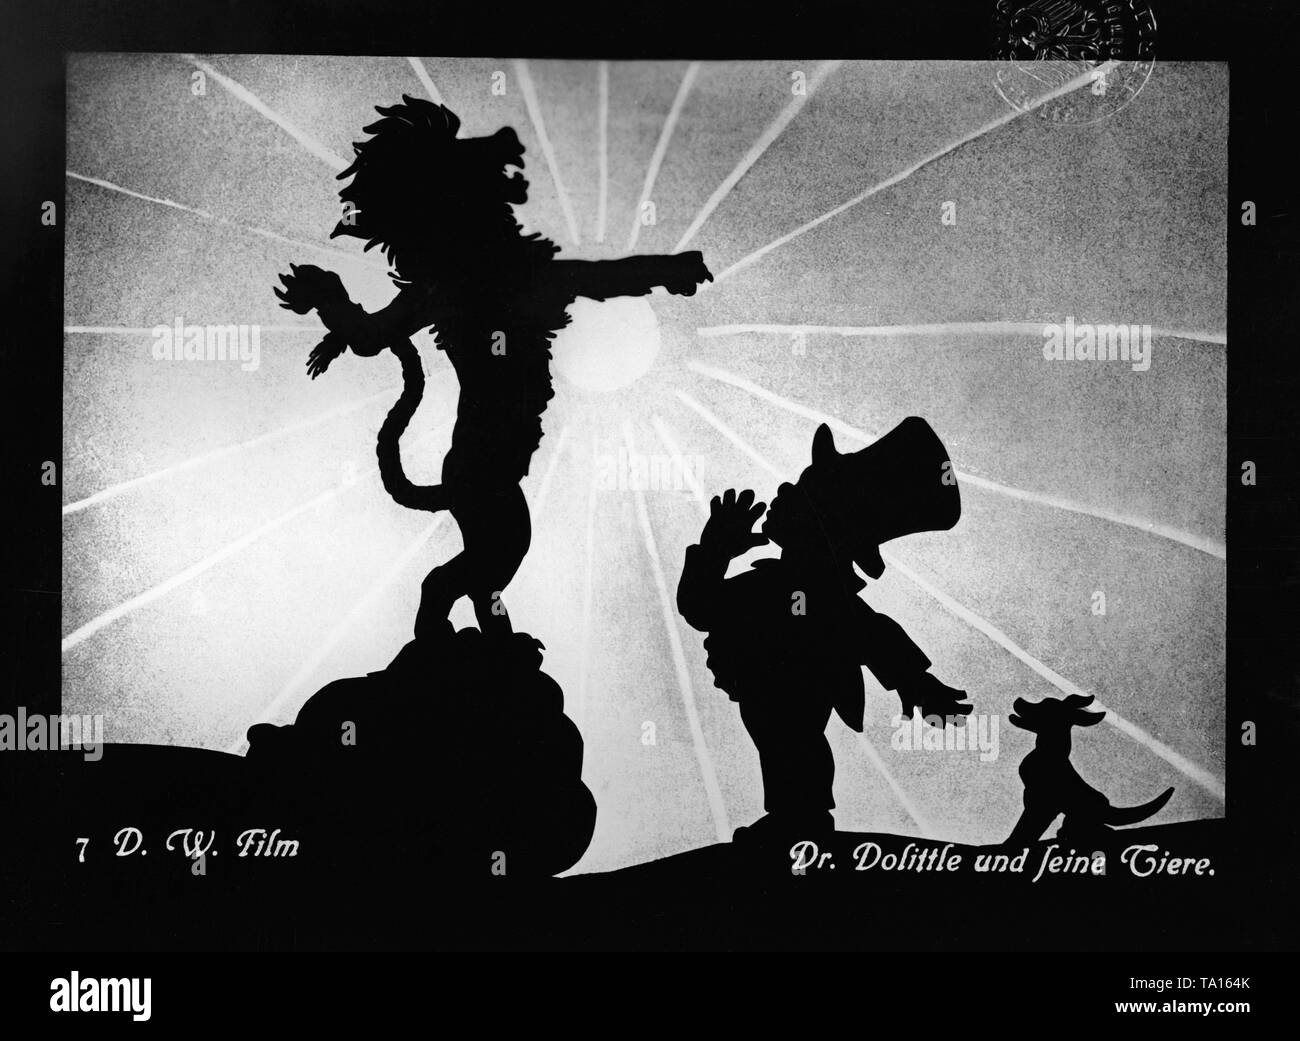 Picture from the silhouette film "Dr. Dolittle and his Animals" by Charlotte Reiniger. The silhouette film, also known as silhouette animation, is a technique of animated film in which silhouettes are put together on a lighted glass plate in front of a white or black background to form a film. The result is the silhouette film, inspired by shadow theater and the pictorial techniques of silhouette cutting. Stock Photo